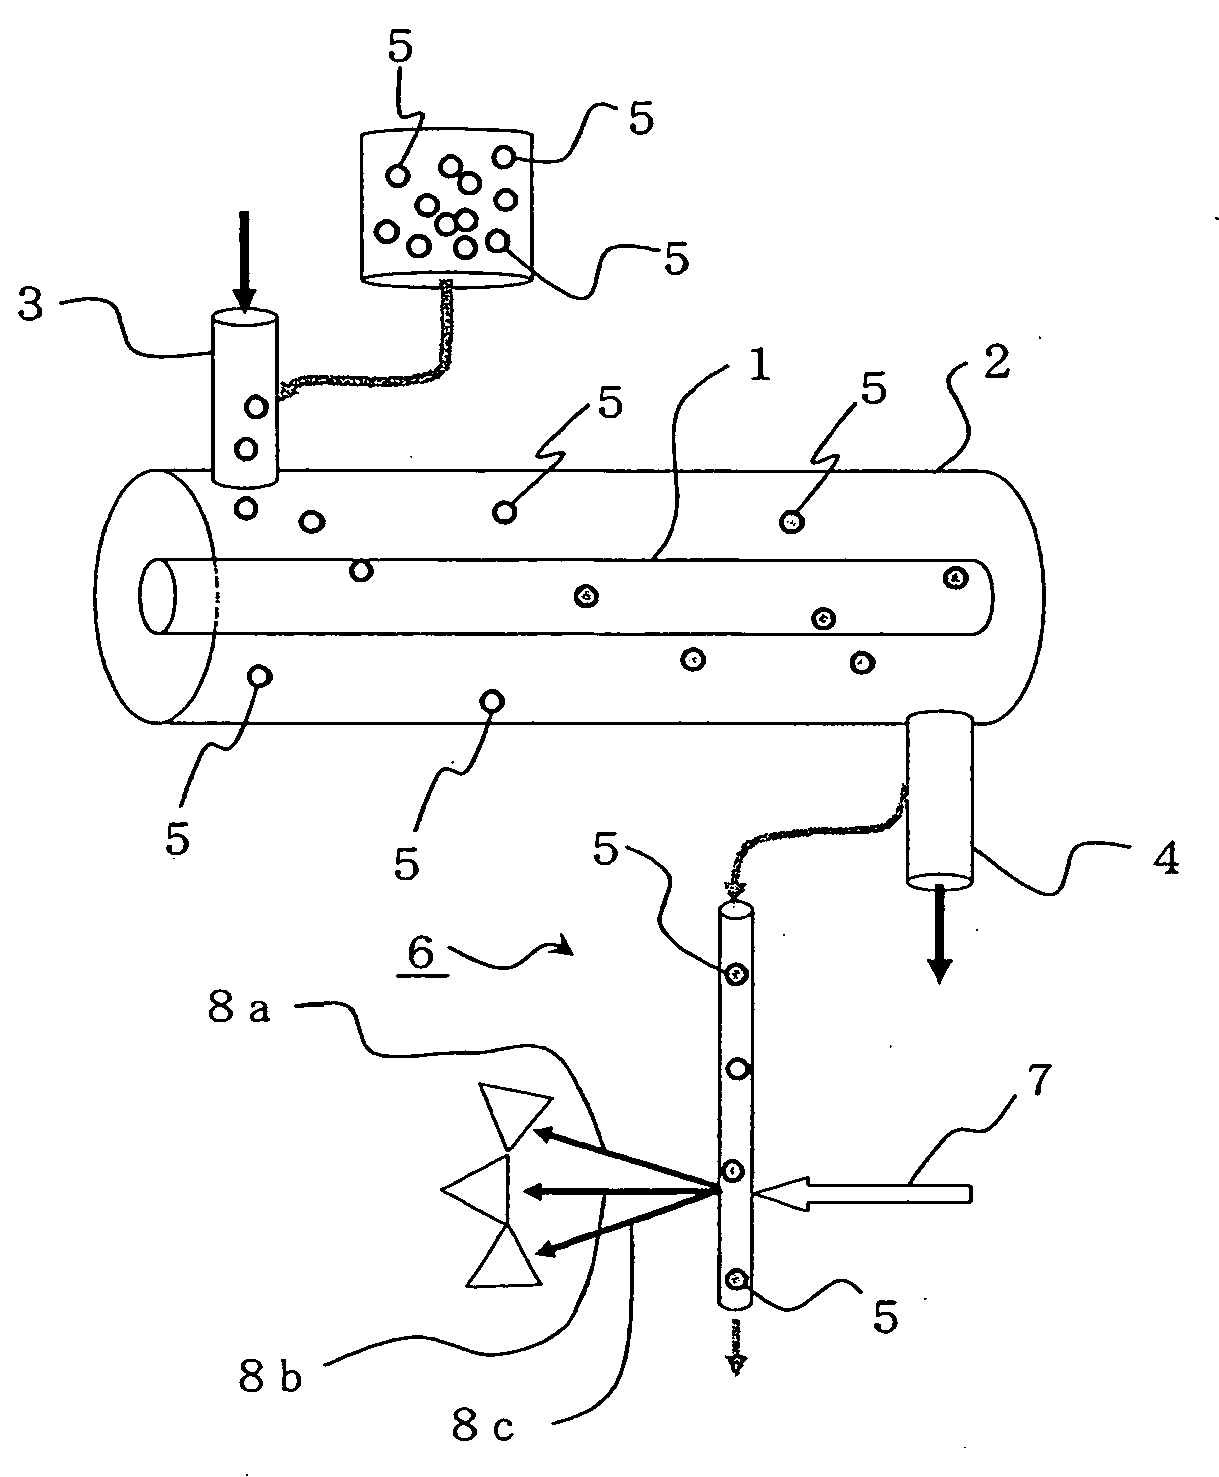 Radiation Dosimeter For Fluid Very Small Substances, And Method Of Measuring Radiation Dose